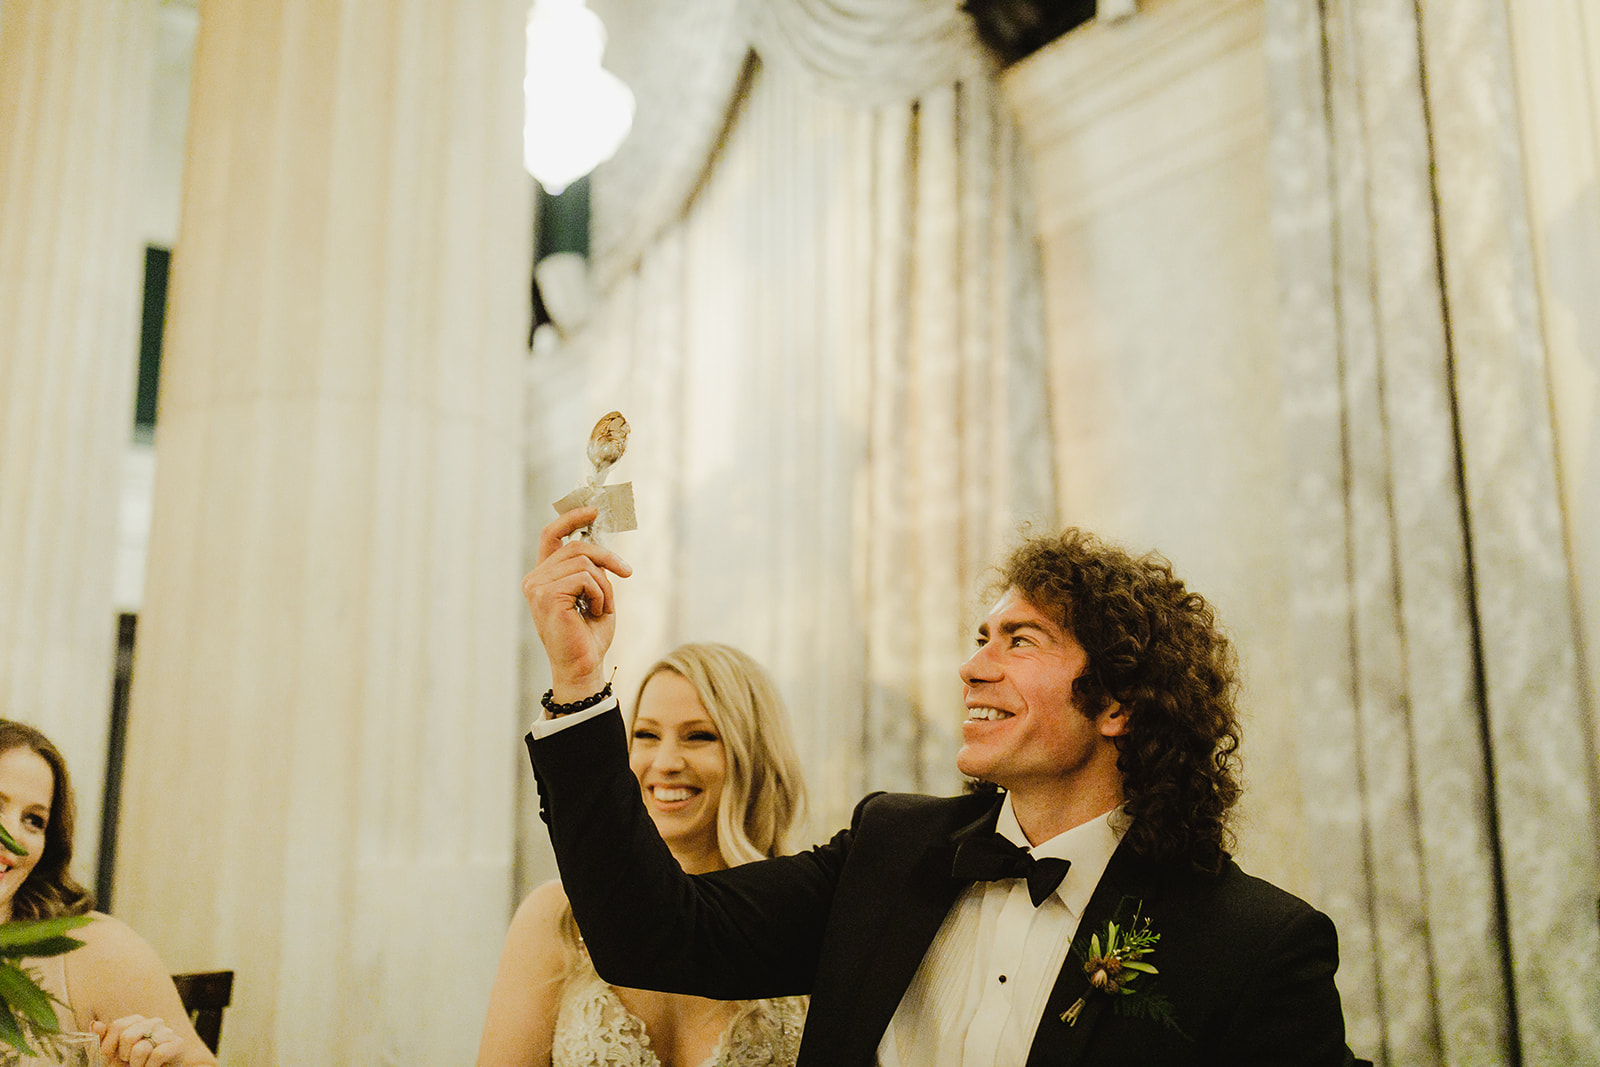 A groom smiling and holding up a spoon